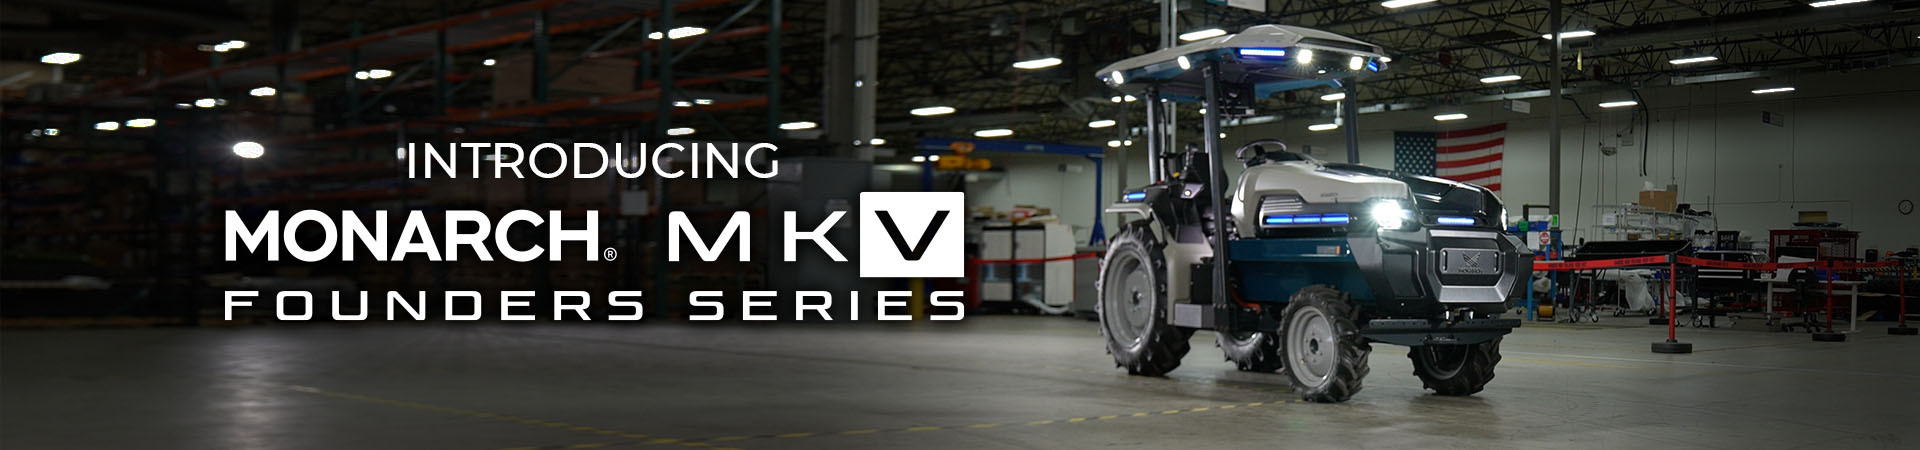 Monarch Tractor Launches Production of Founder Series MK-V: The First Commercially Available Electric, Driver-Optional Smart Tractor